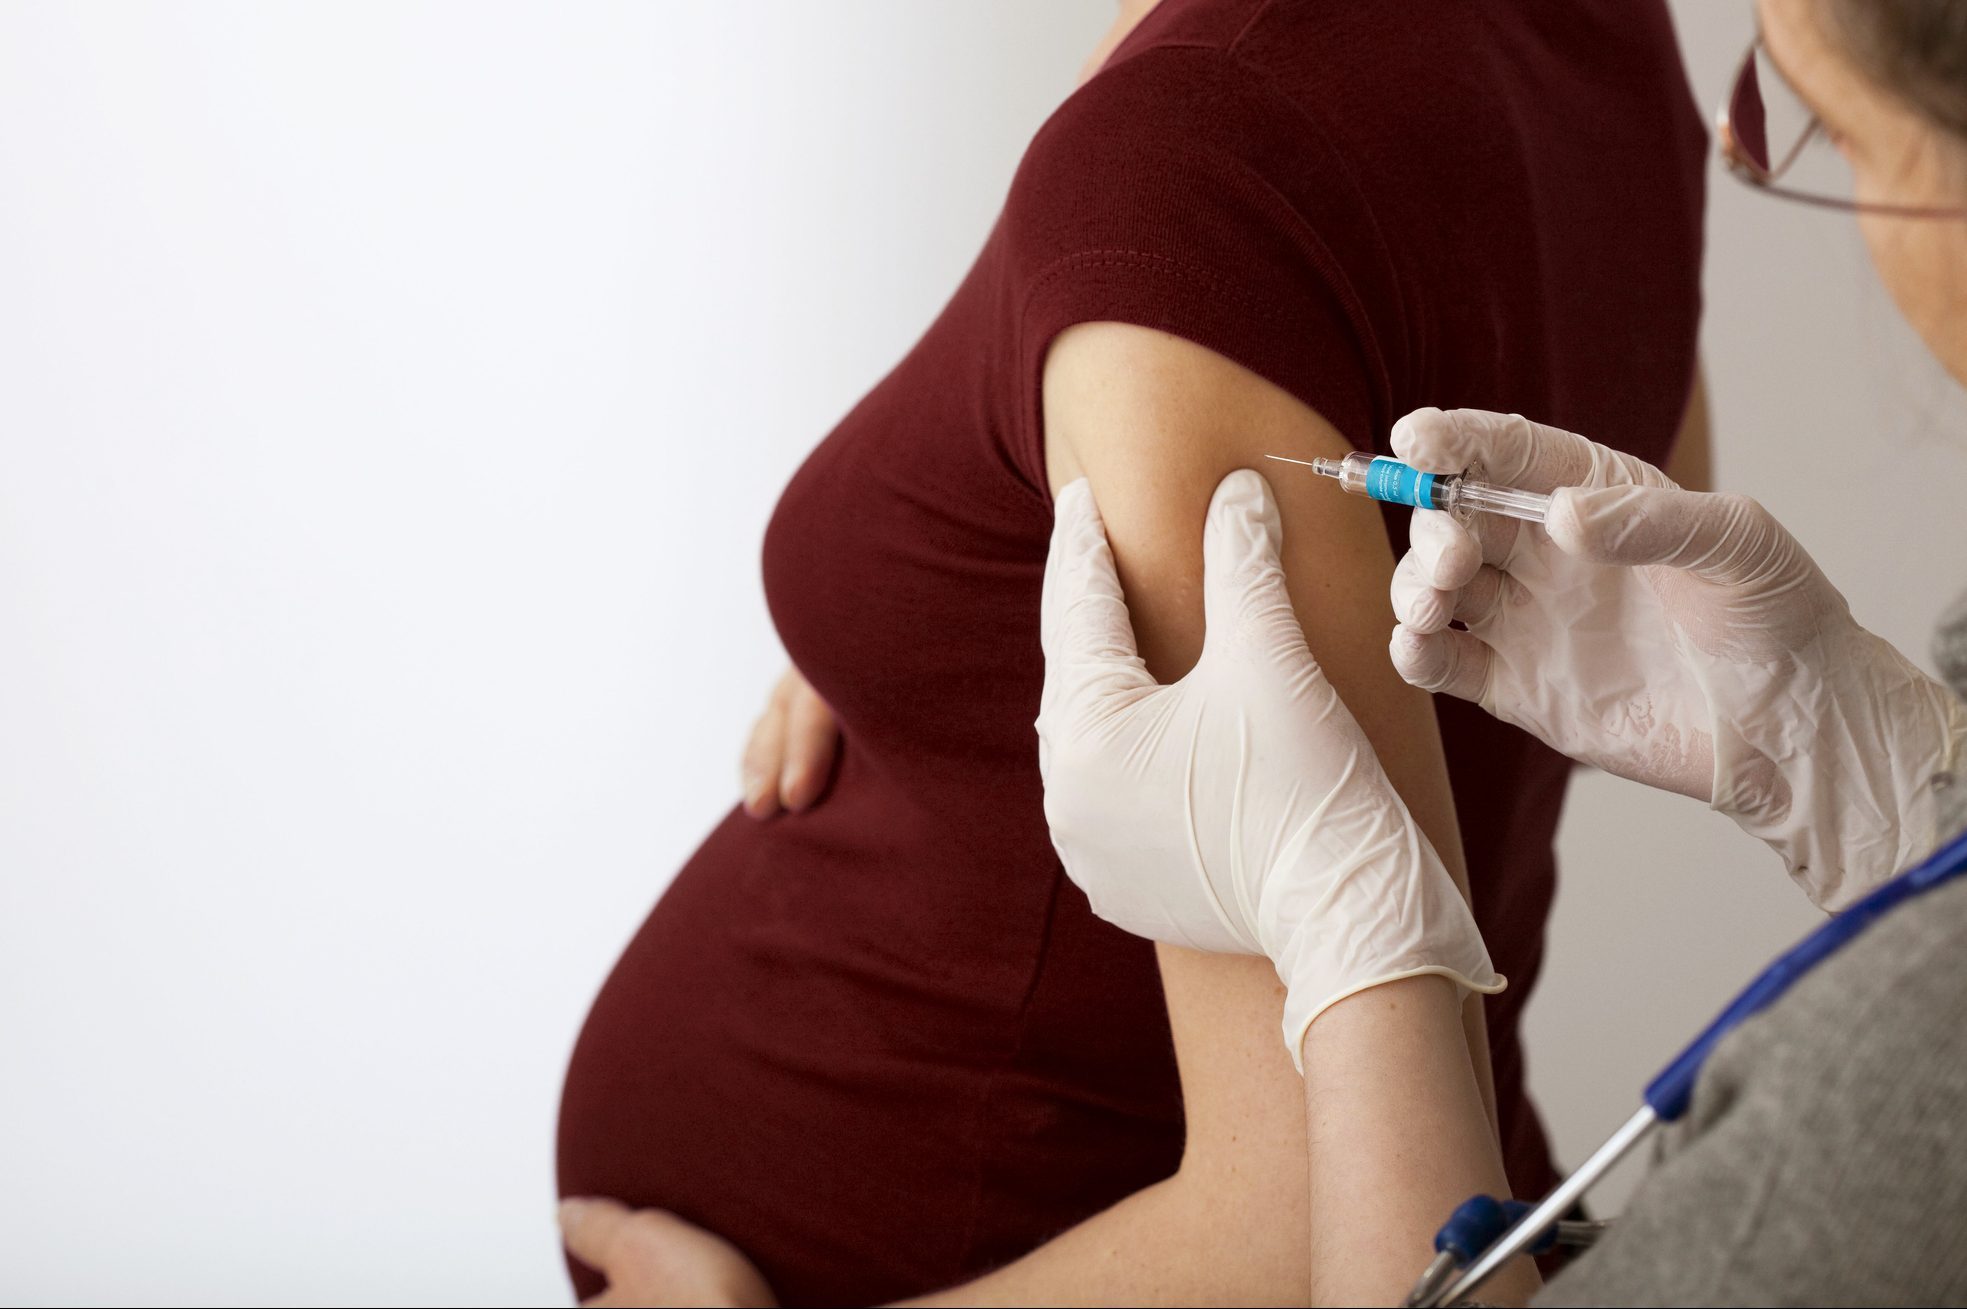 Tdap Vaccine in Pregnancy 6 Things You Should Know  The Healthy